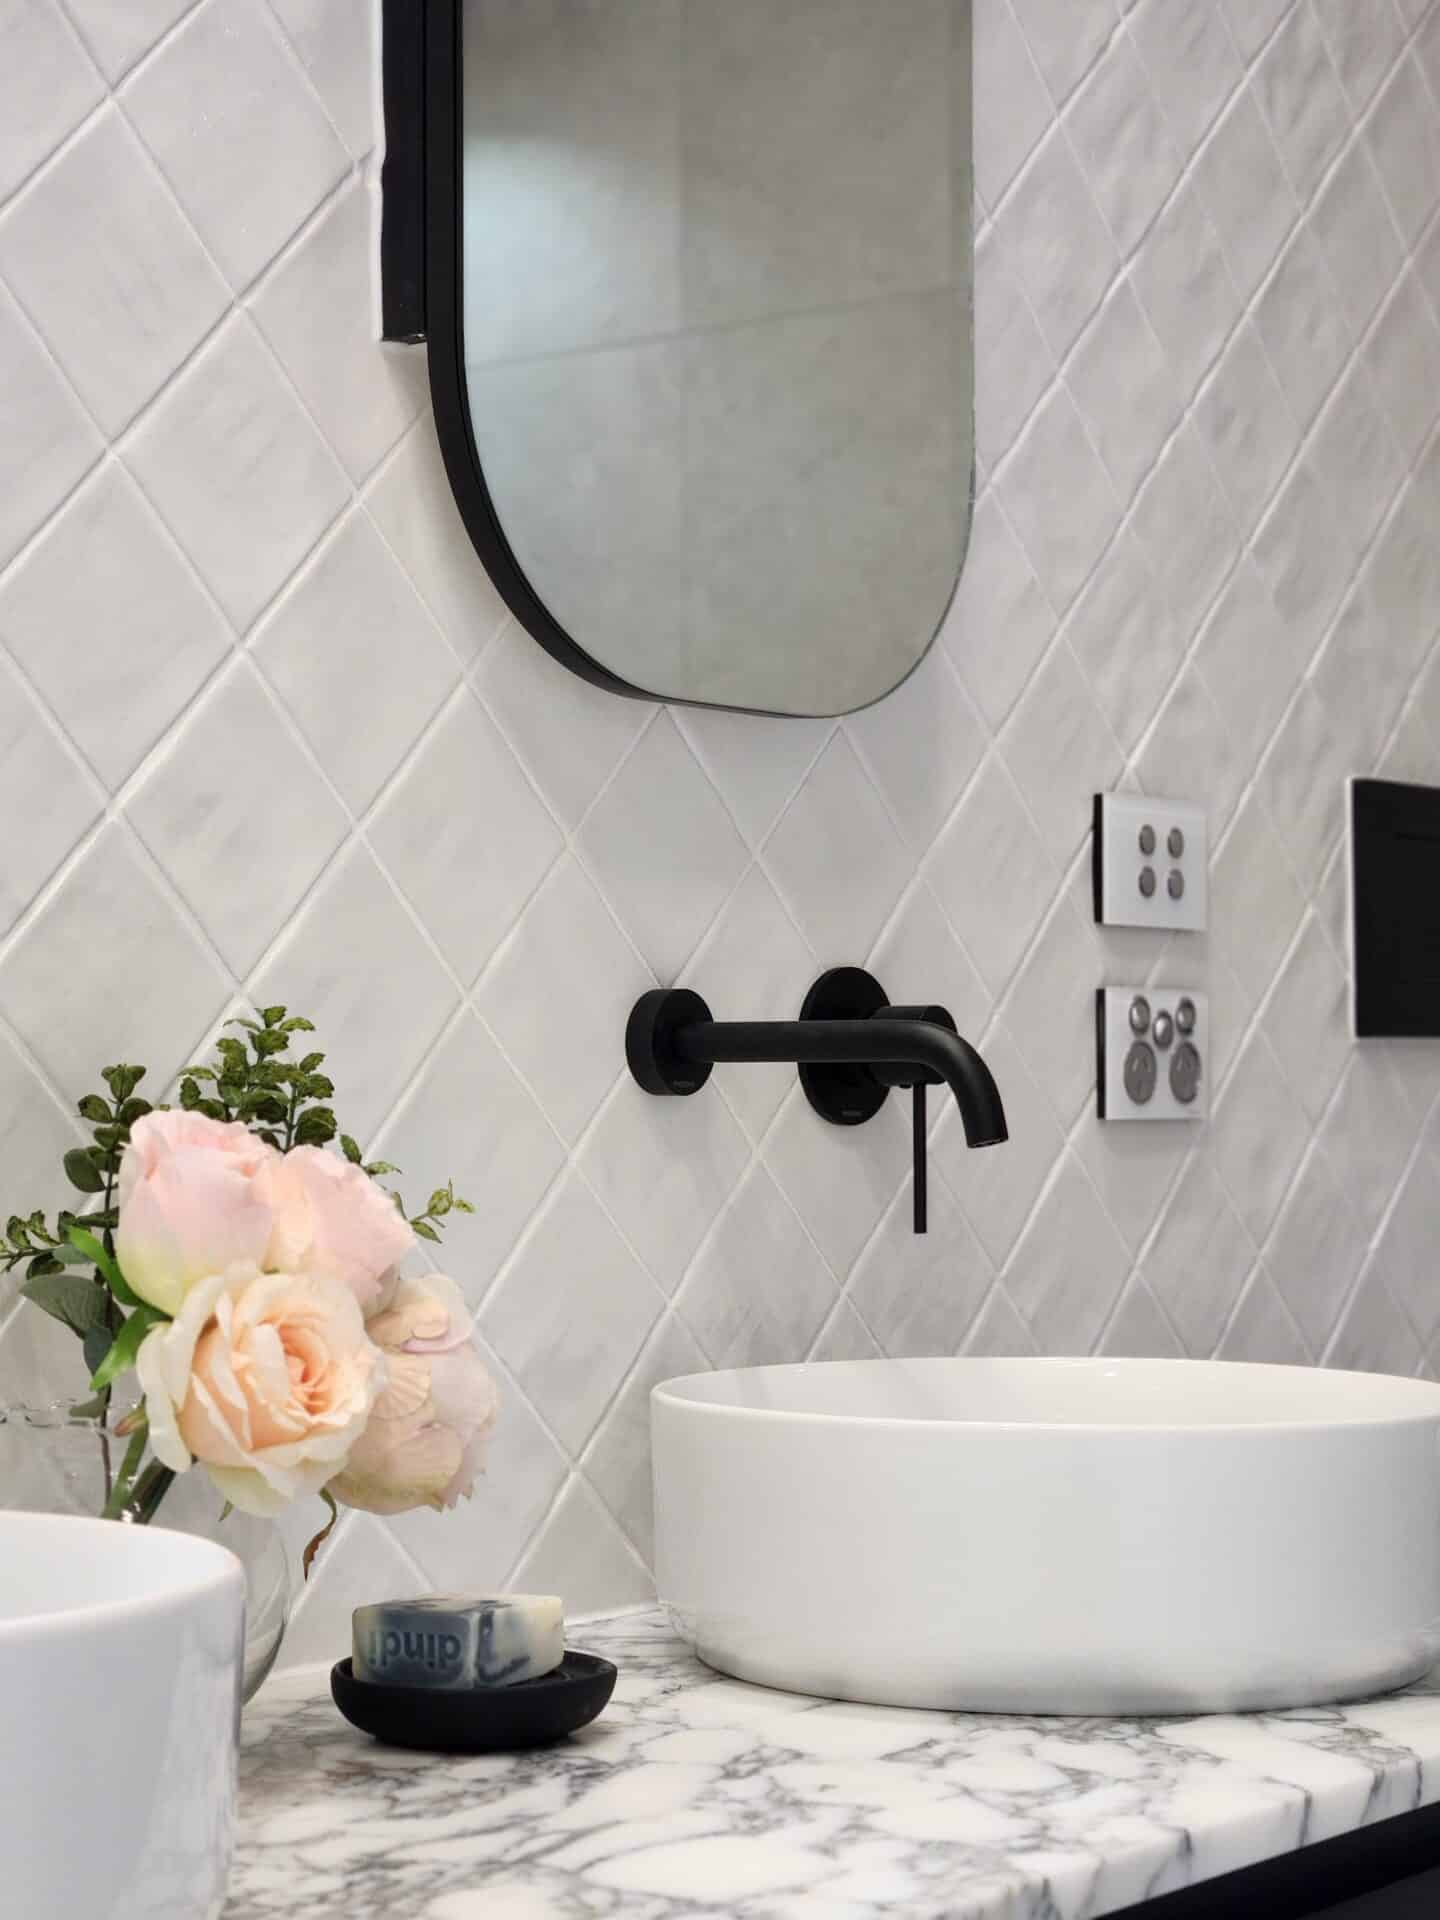 White ensuite with a sink, a flower vase and a soap.